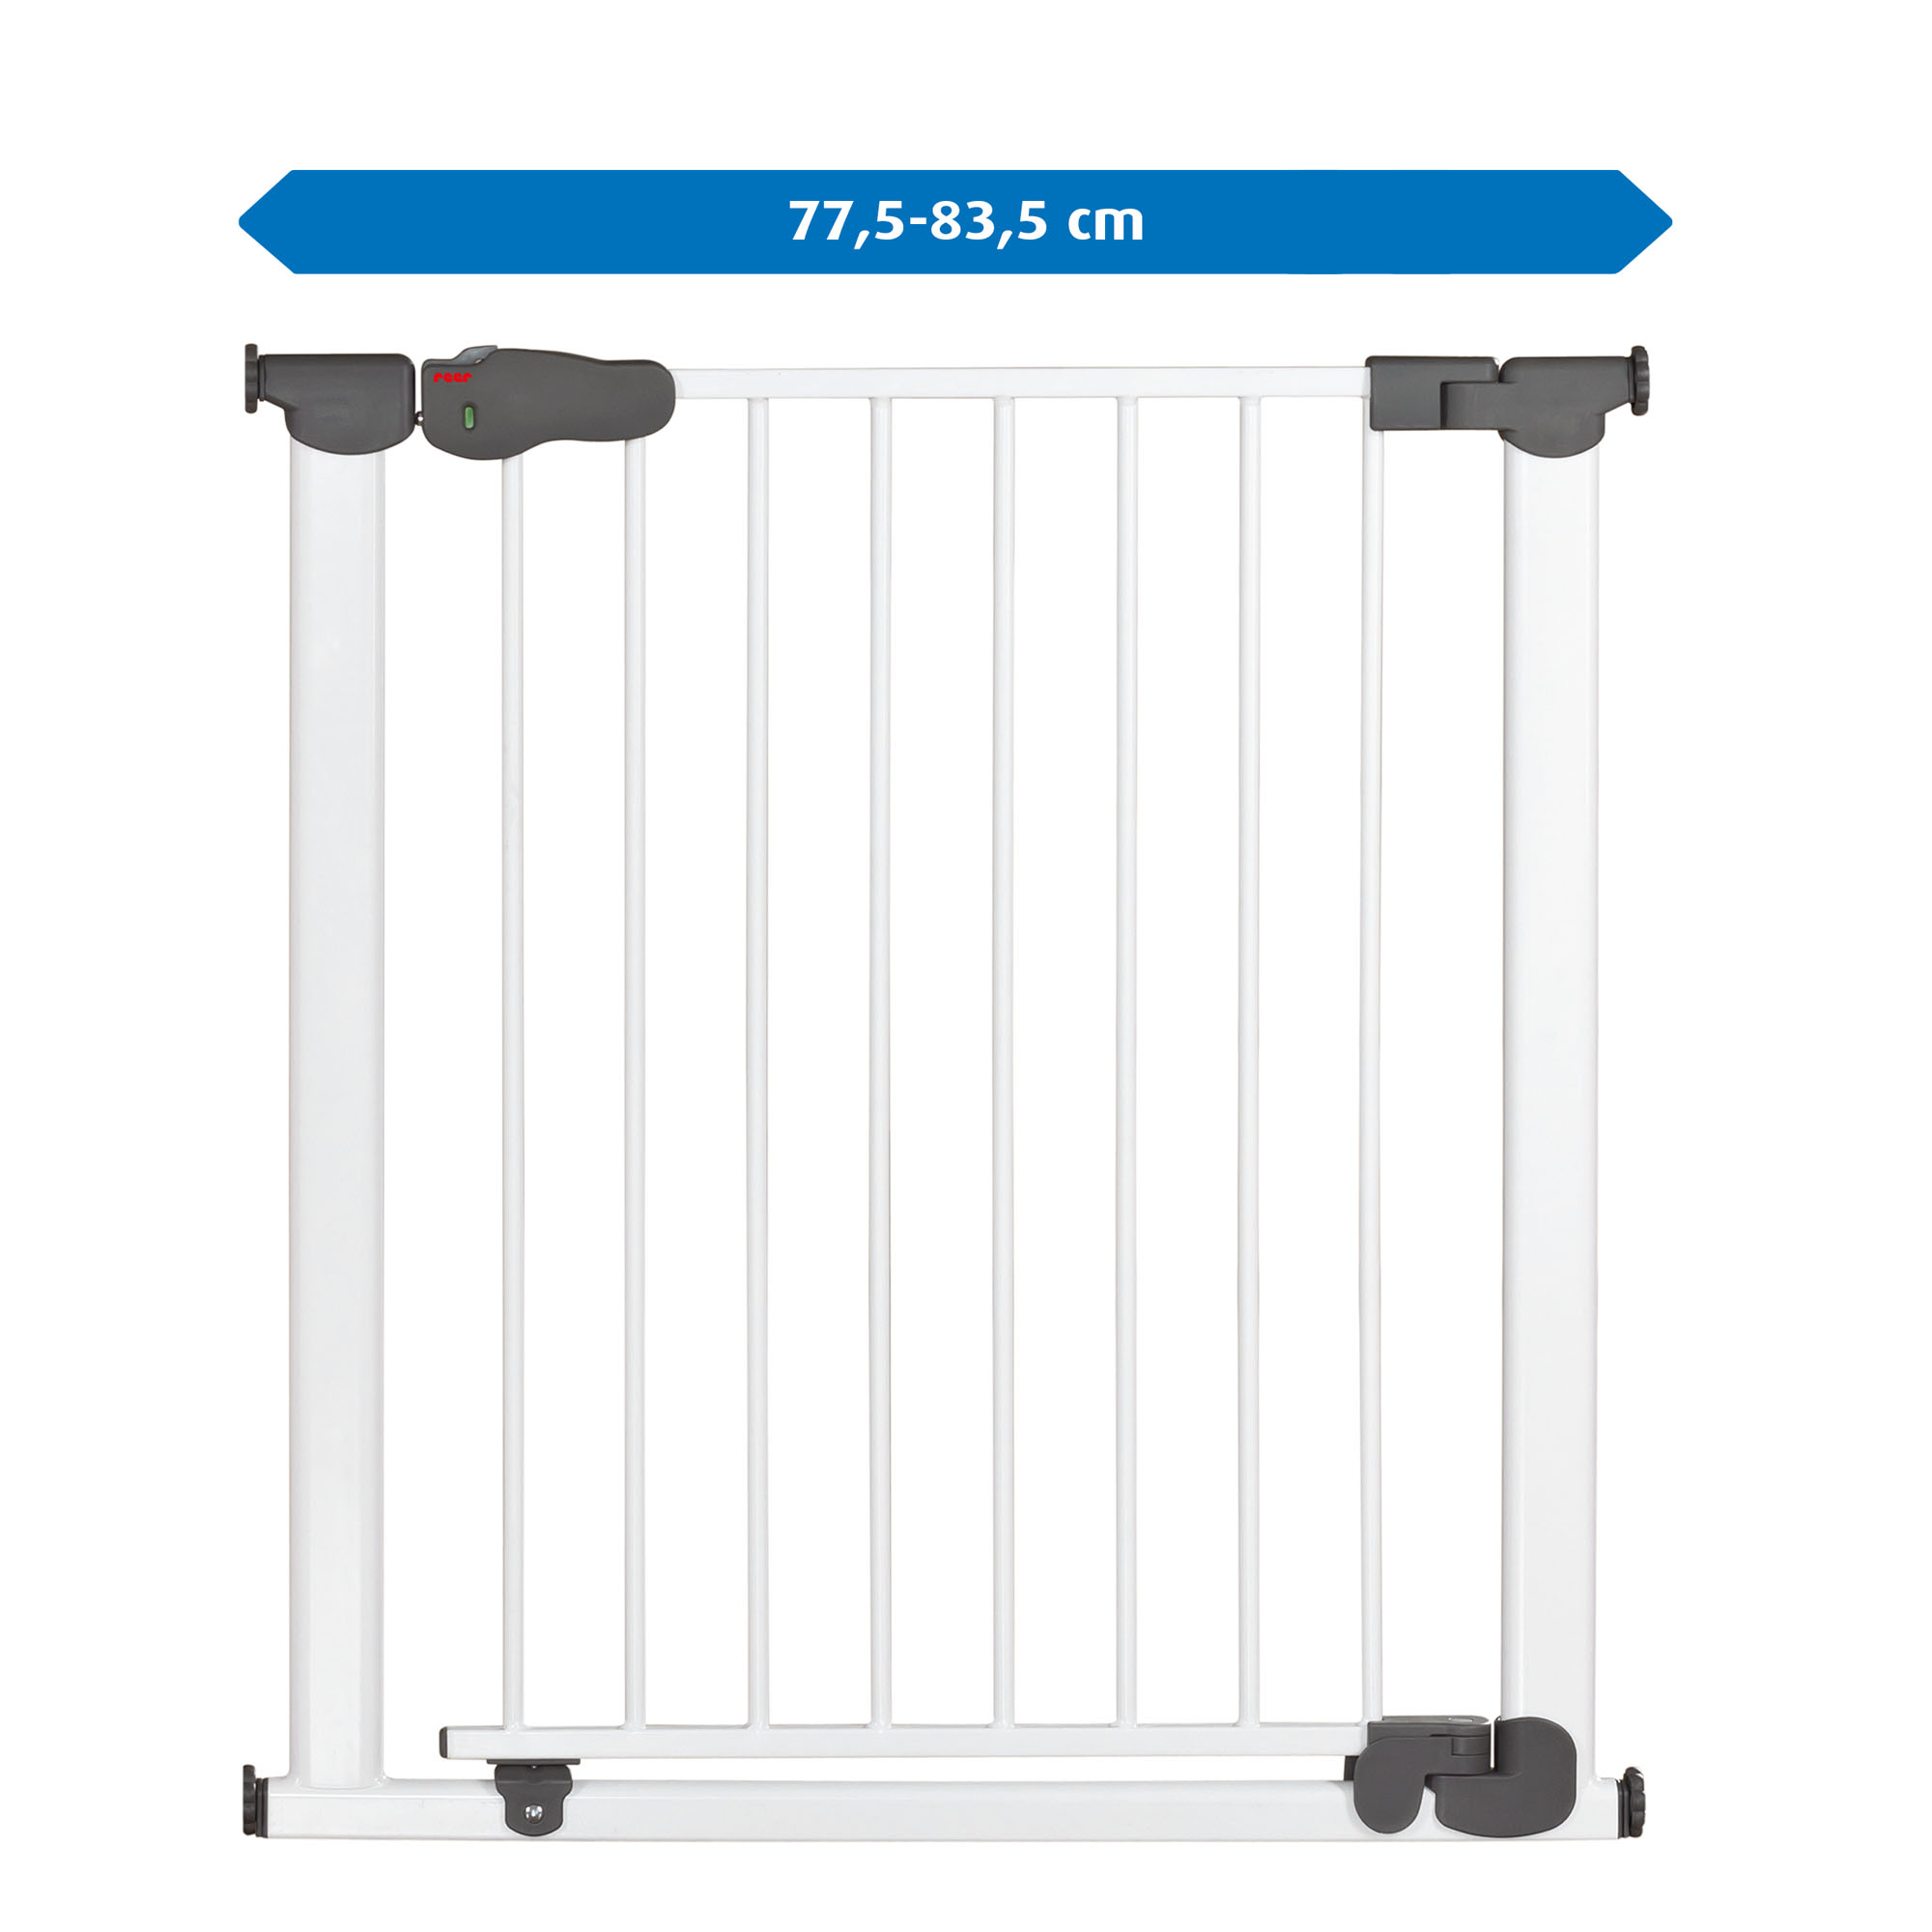 Advanced  Pressure-mounted gate for gateway widths from 77.5 - 83.5 cm